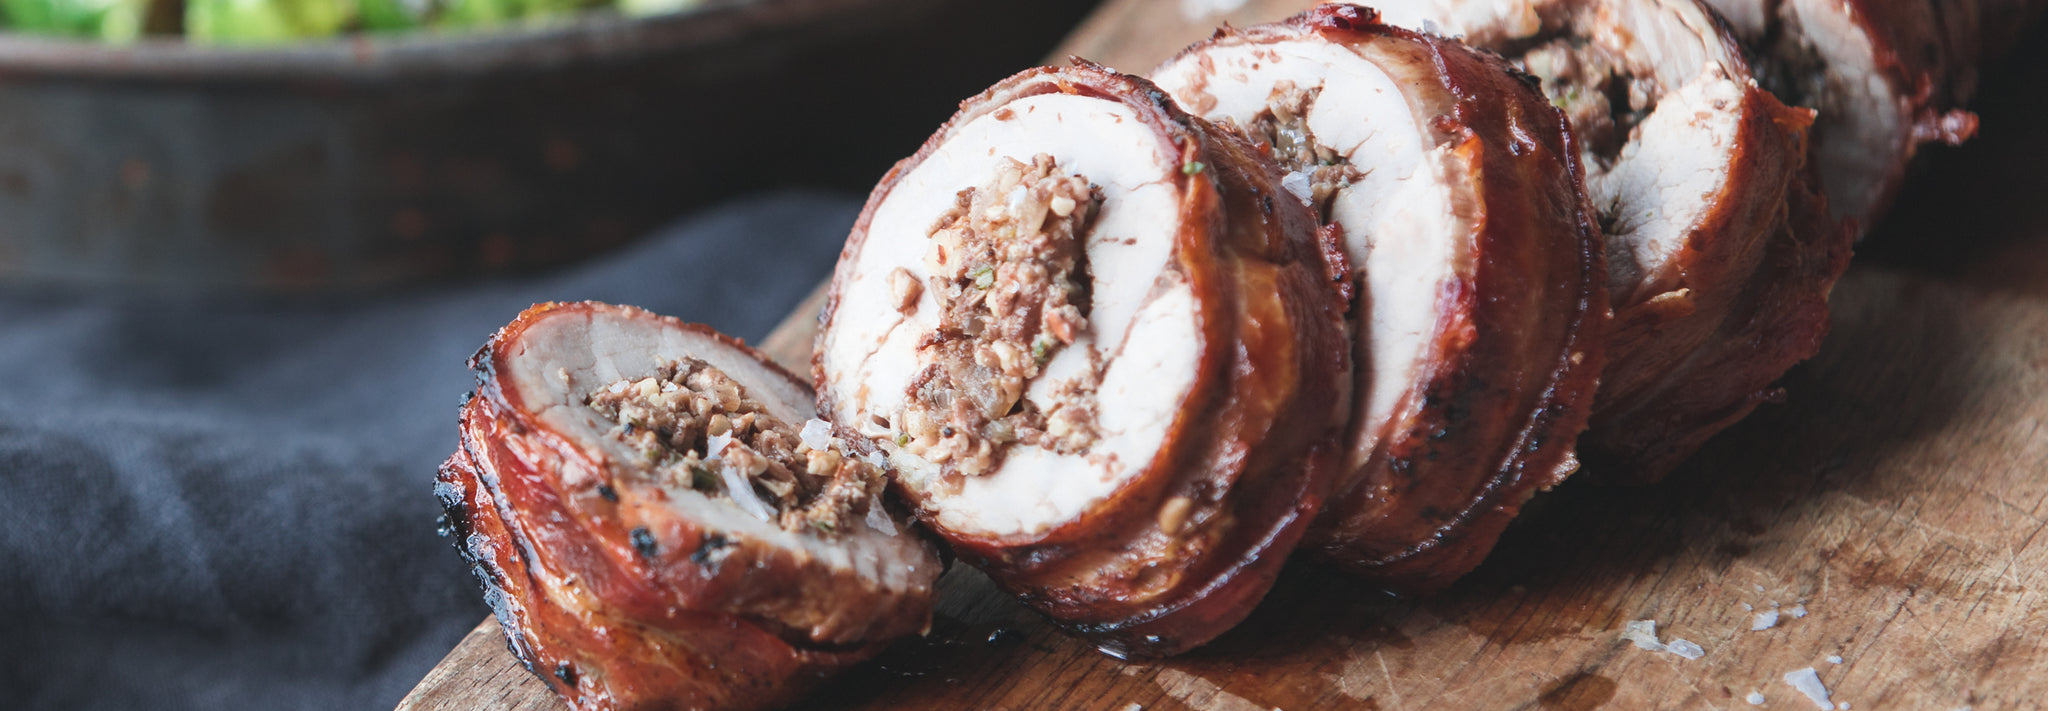 Pork Tenderloin with Mushroom Stuffing & Roasted Sprouts - Gozney - Roccbox